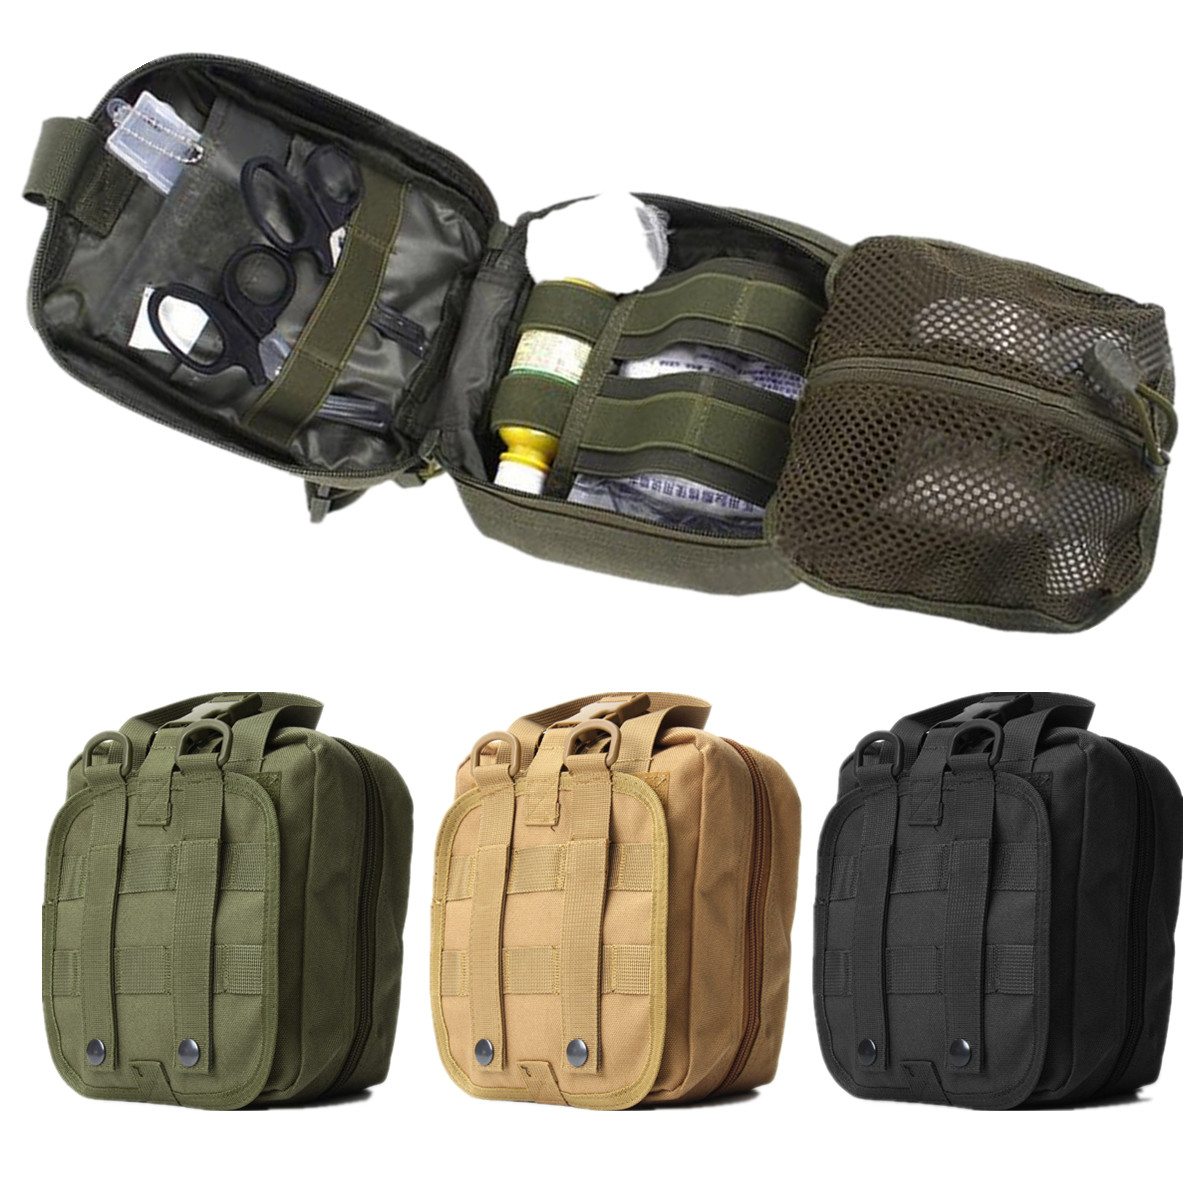 Ipree ® Waterproof Nylon Tactical Molle Bag Medical First Aid Utility Emergency 